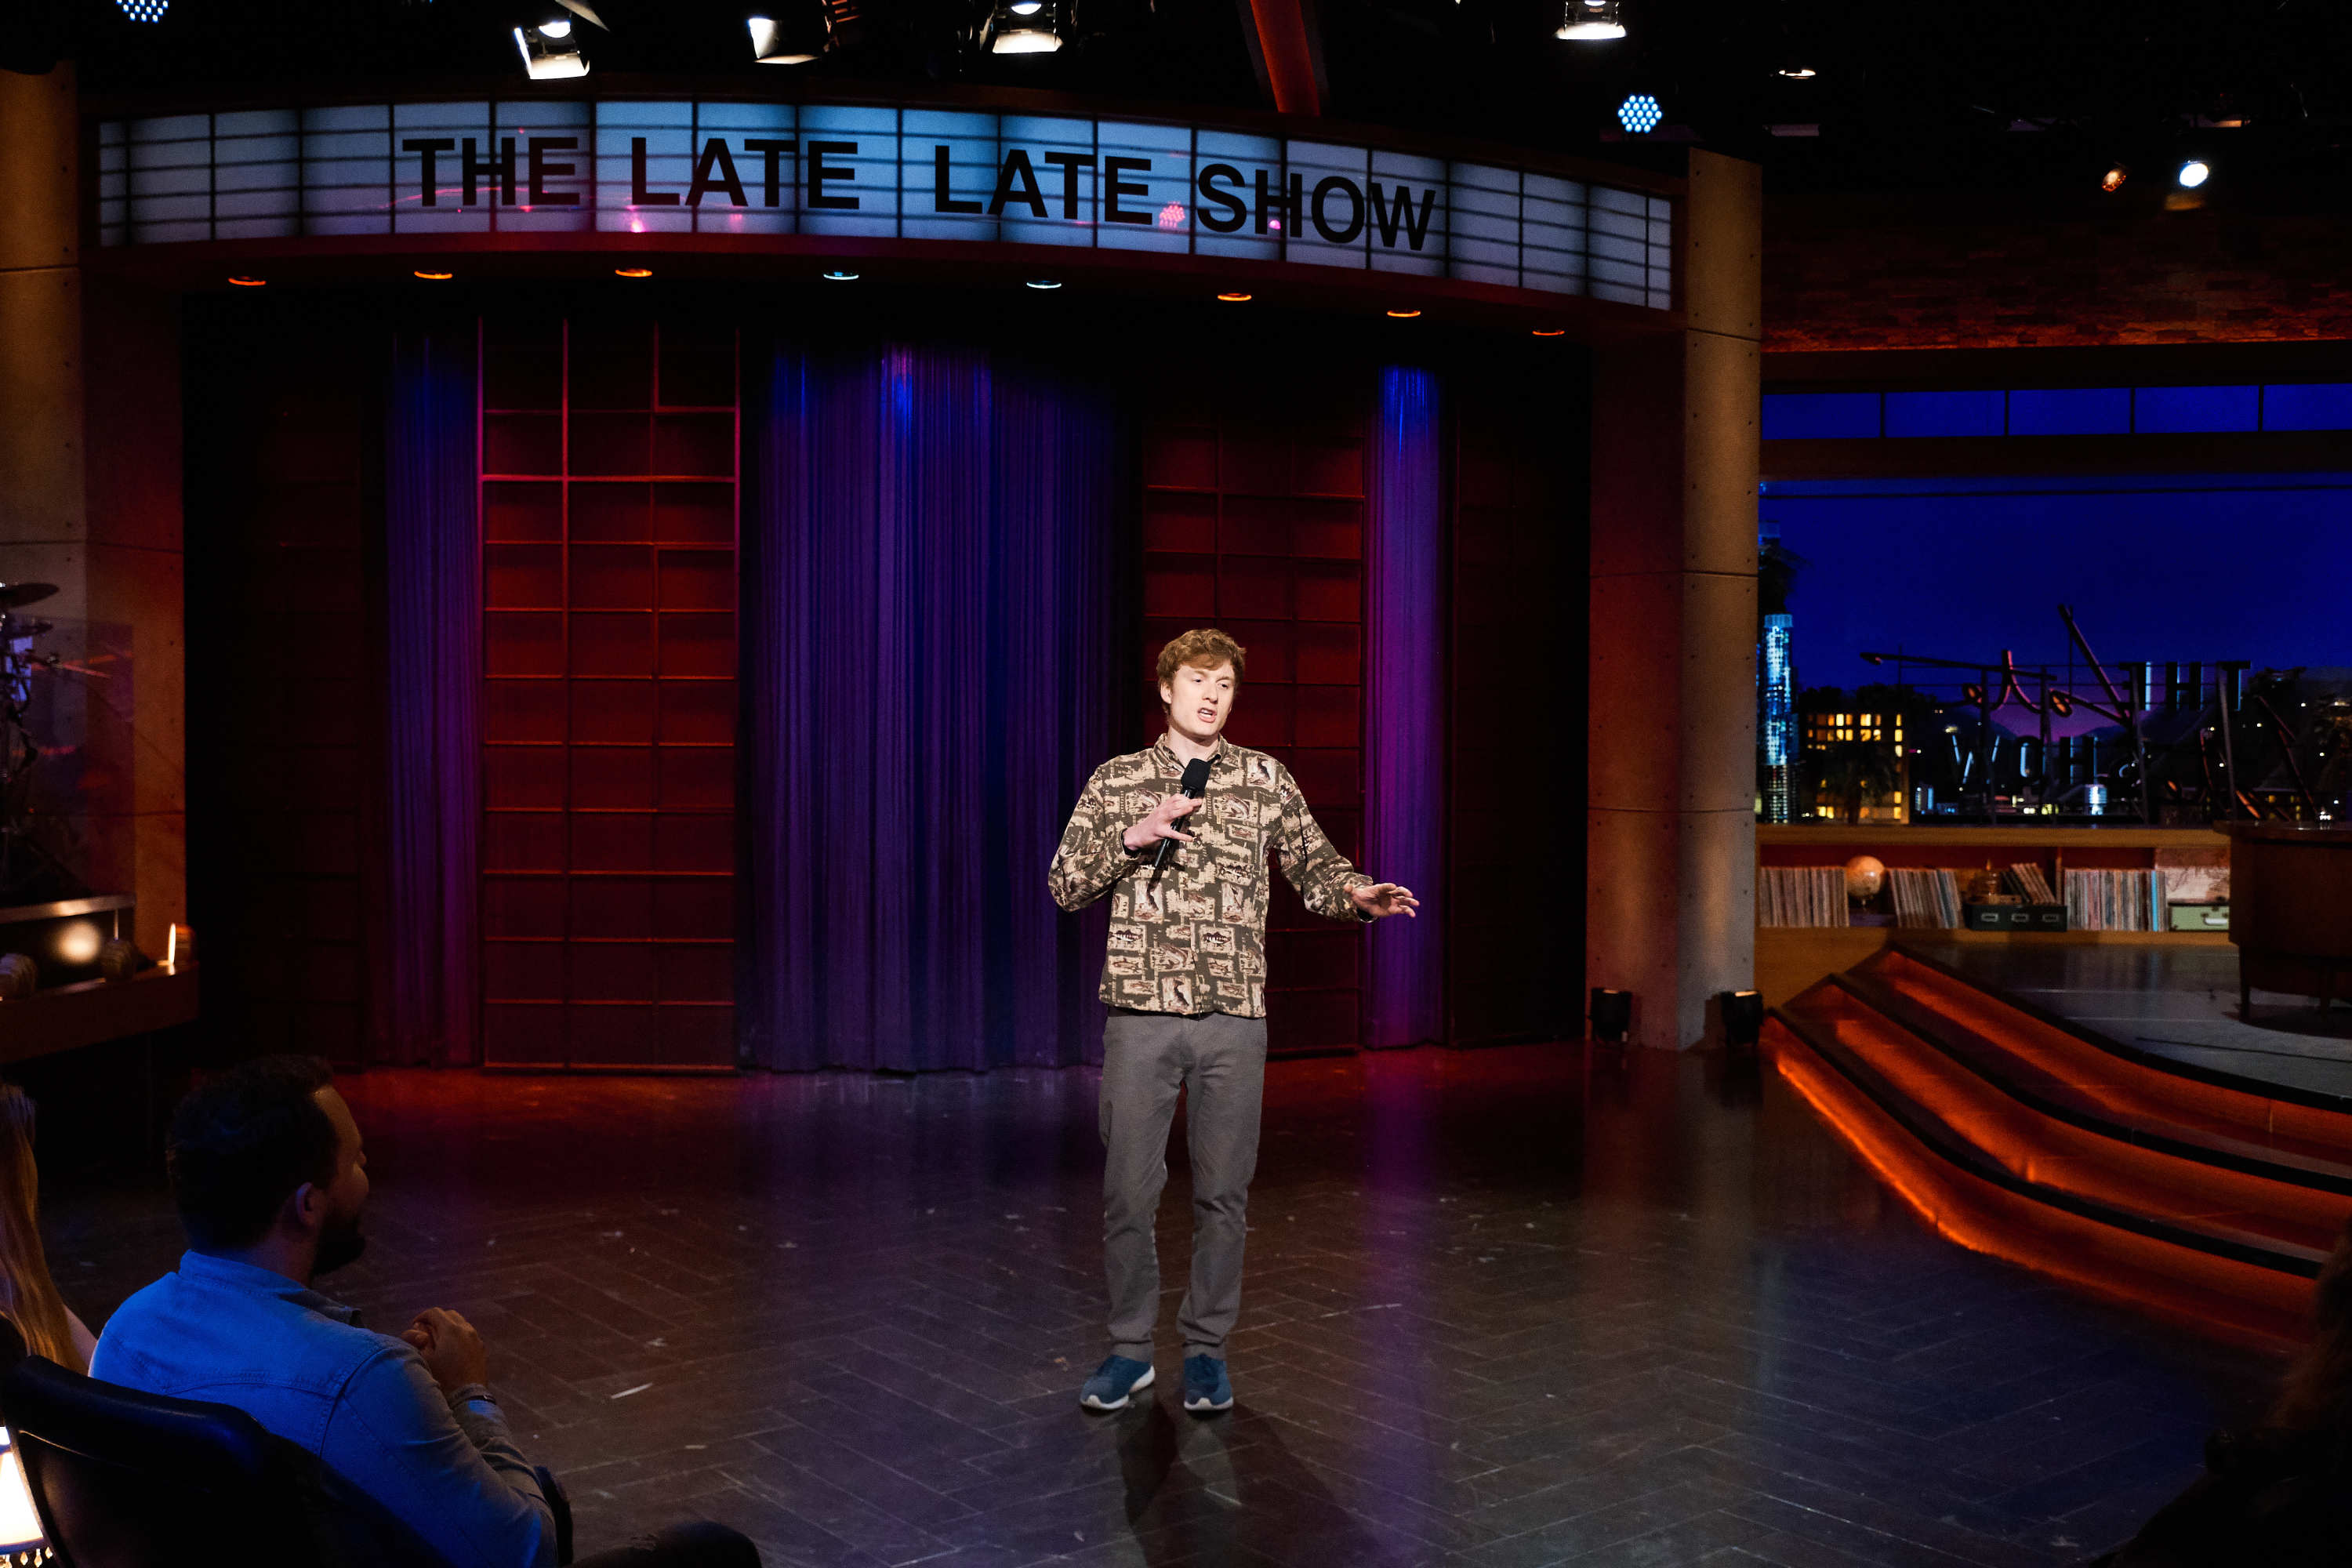 James Acaster is pictured during his performance on "The Late Late Show with James Corden," on May 16, 2018, in Los Angeles, California | Source: Getty Images